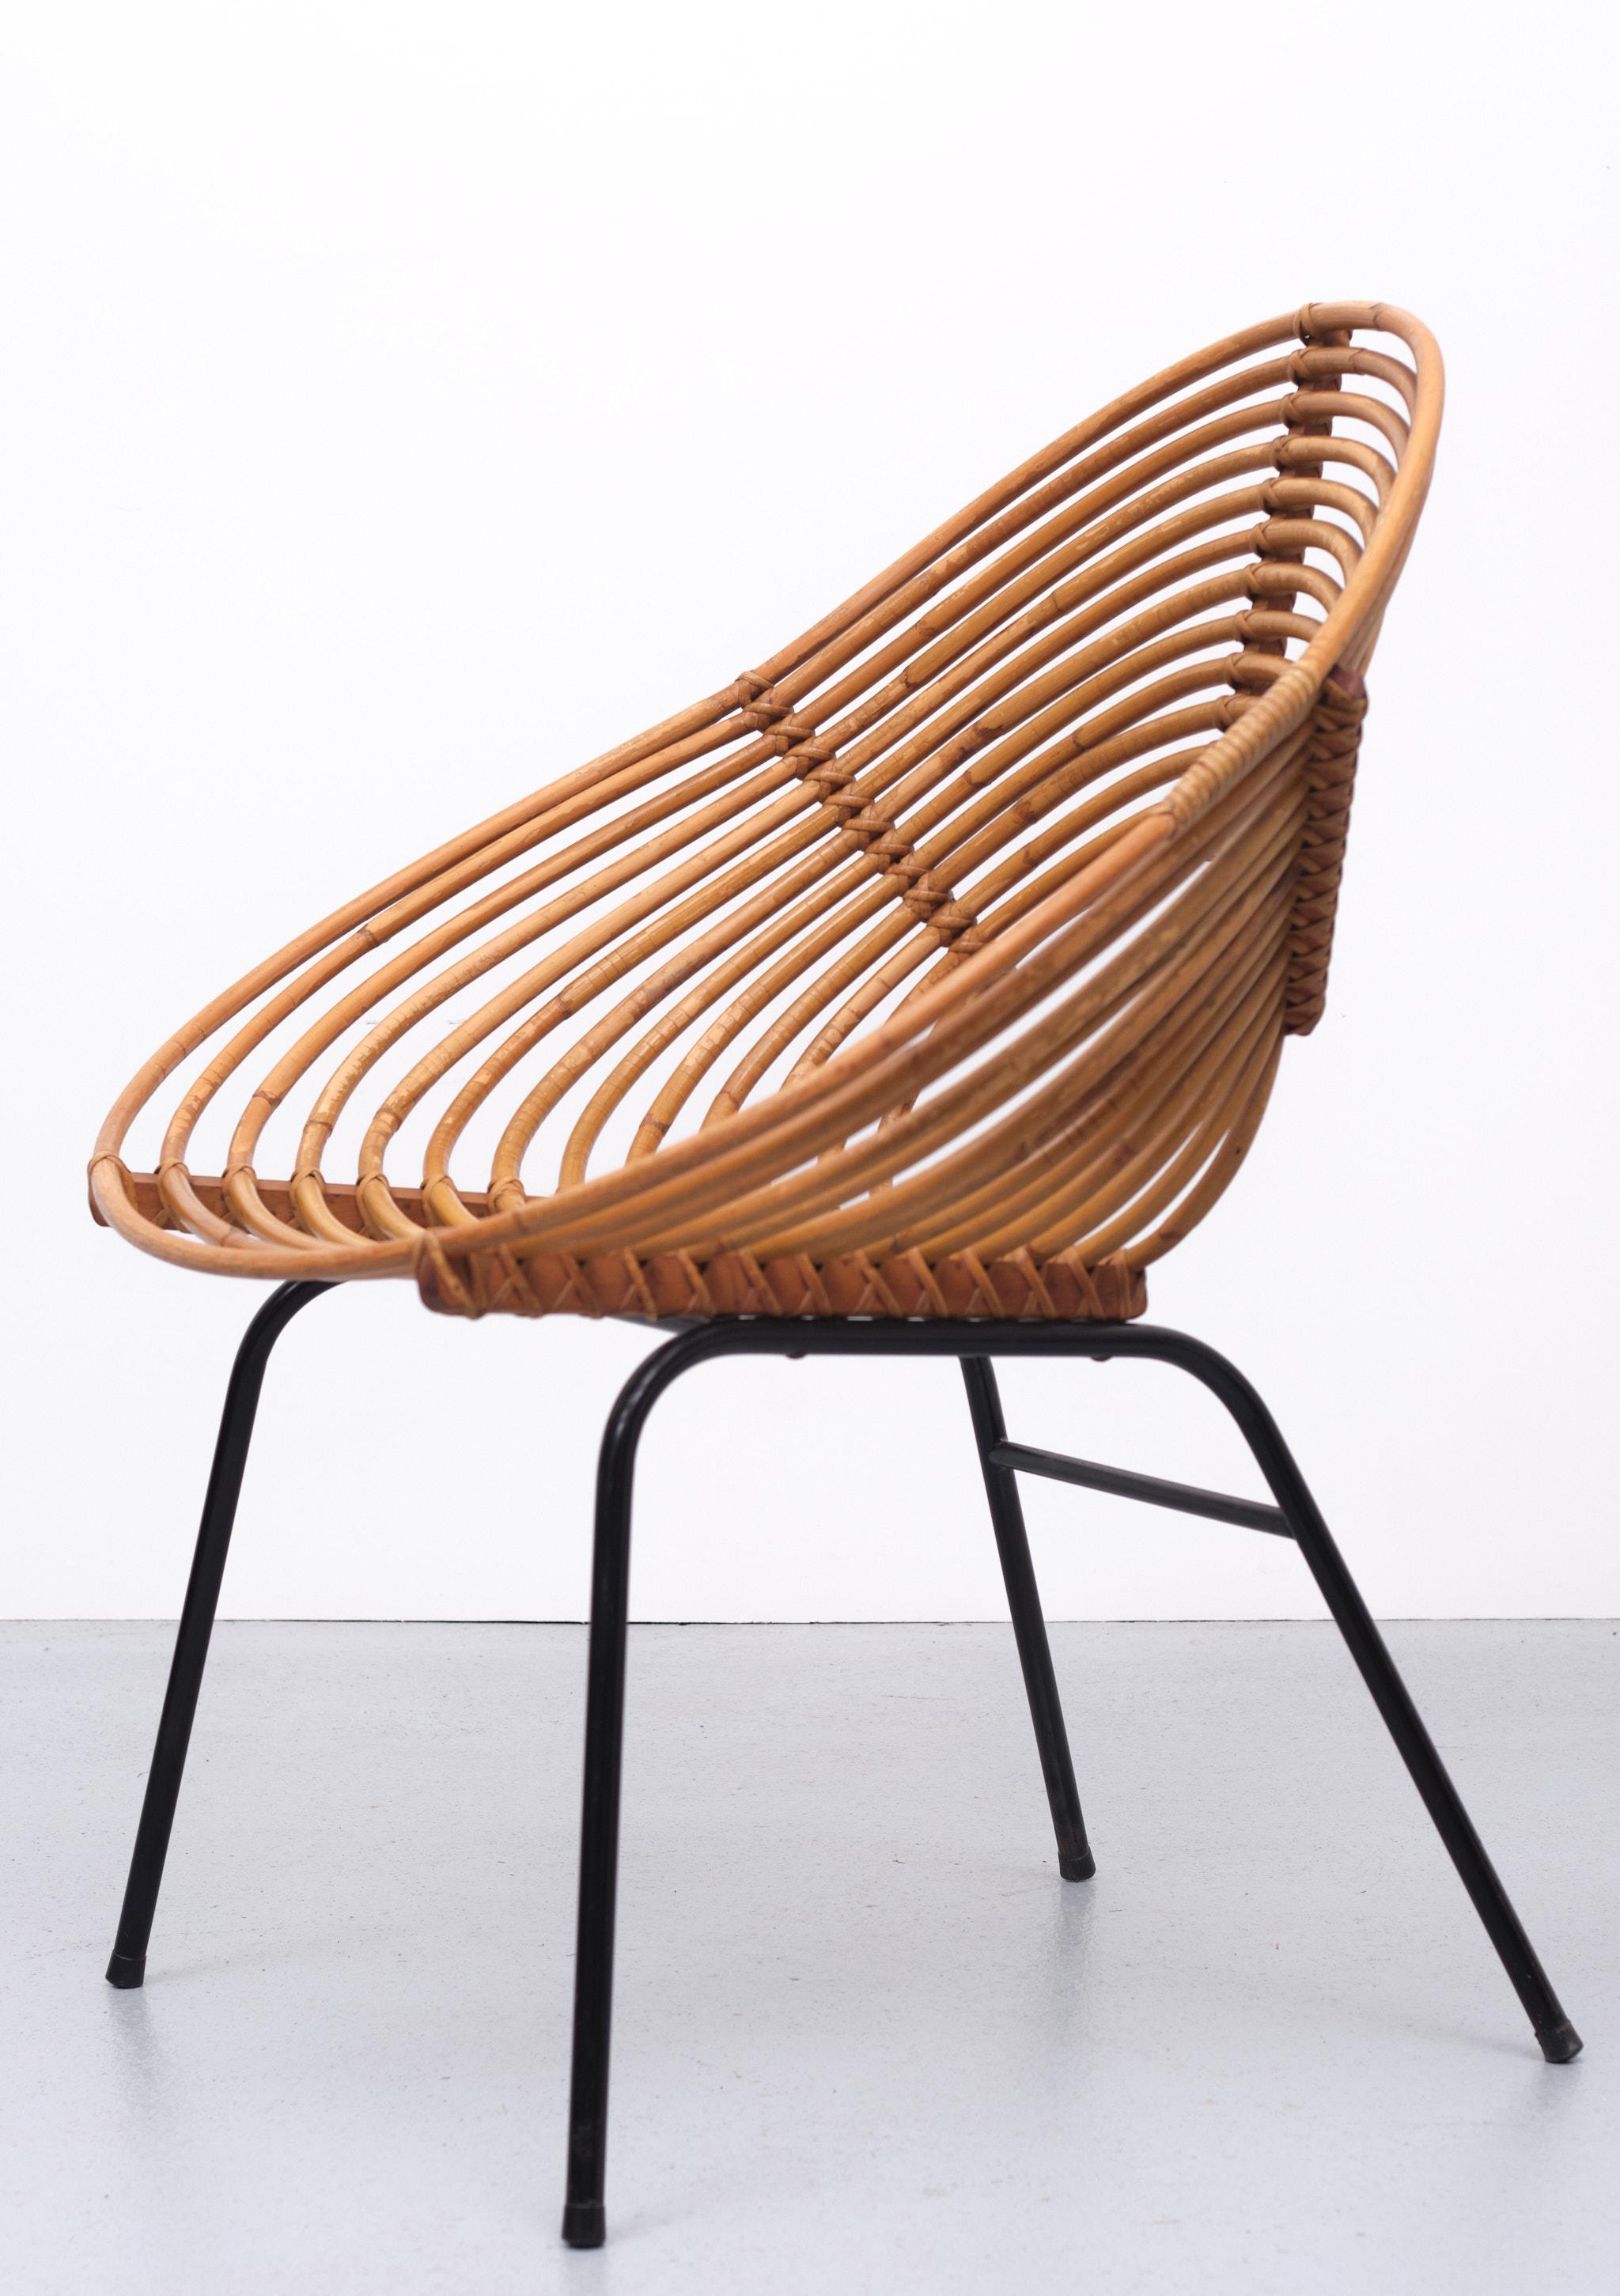 Love this rare Design Balloon Chair just some strips of Wicker,
on a Black Metal tube base. So good and simple Design. Manufactured by 
Rohe Noordwolde design dirk van sliedrecht 1950s Good Condition. 
 